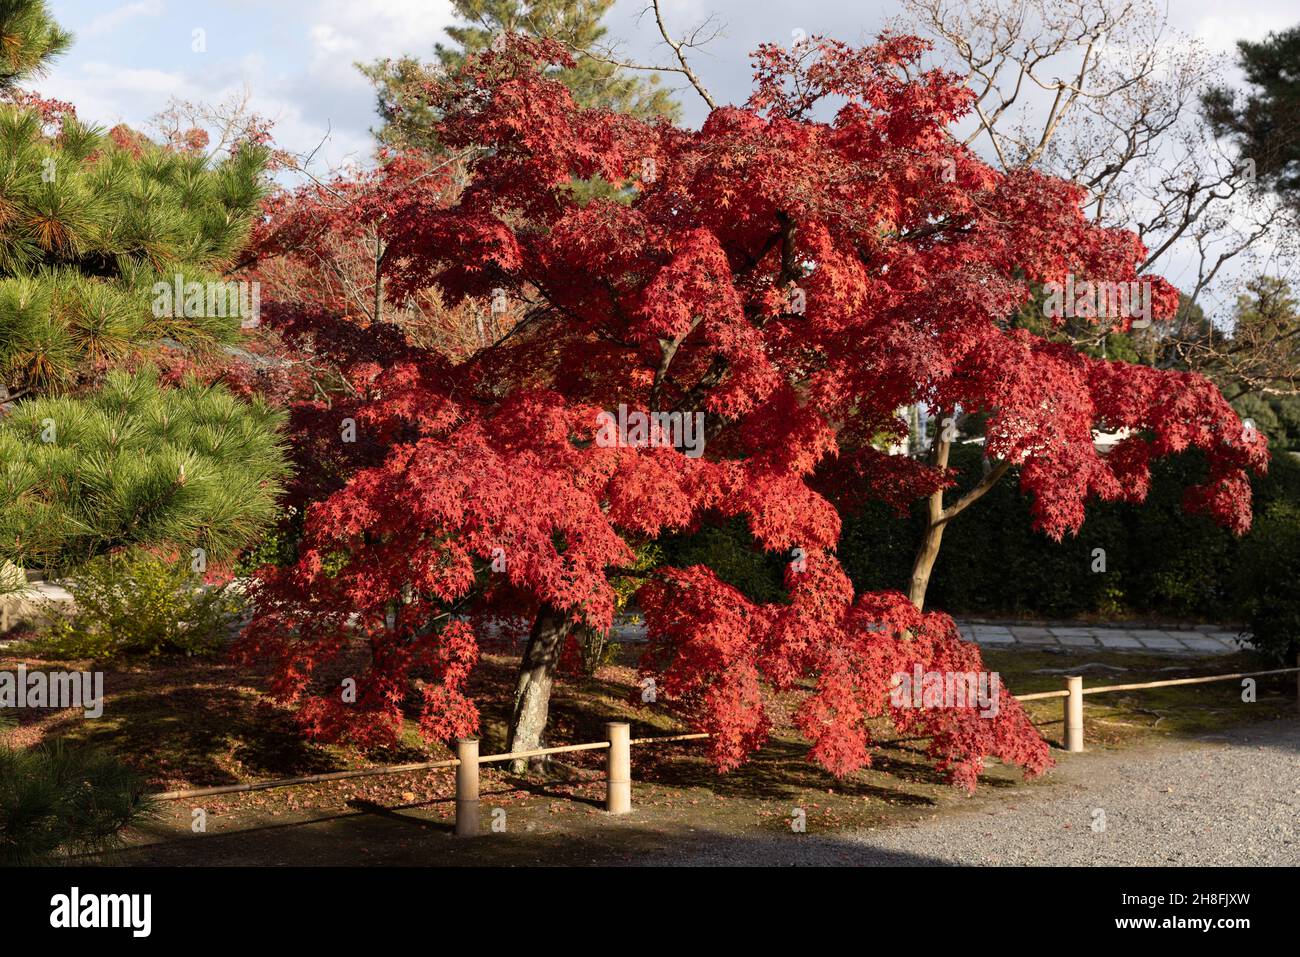 Kyoto, Japan. 26th Nov, 2021. Momoji tree (Japanese Maple) is seen at the entrance of the Toji-in Temple.Toji-in was established in 1341 on the southern slope of Mount Kinugasa by the shogun Ashikaga Takauji. 15 shoguns came from the Ashikaga clan making the Toji-in temple rich in historical artifacts and artworks. (Photo by Stanislav Kogiku/SOPA Images/Sipa USA) Credit: Sipa USA/Alamy Live News Stock Photo